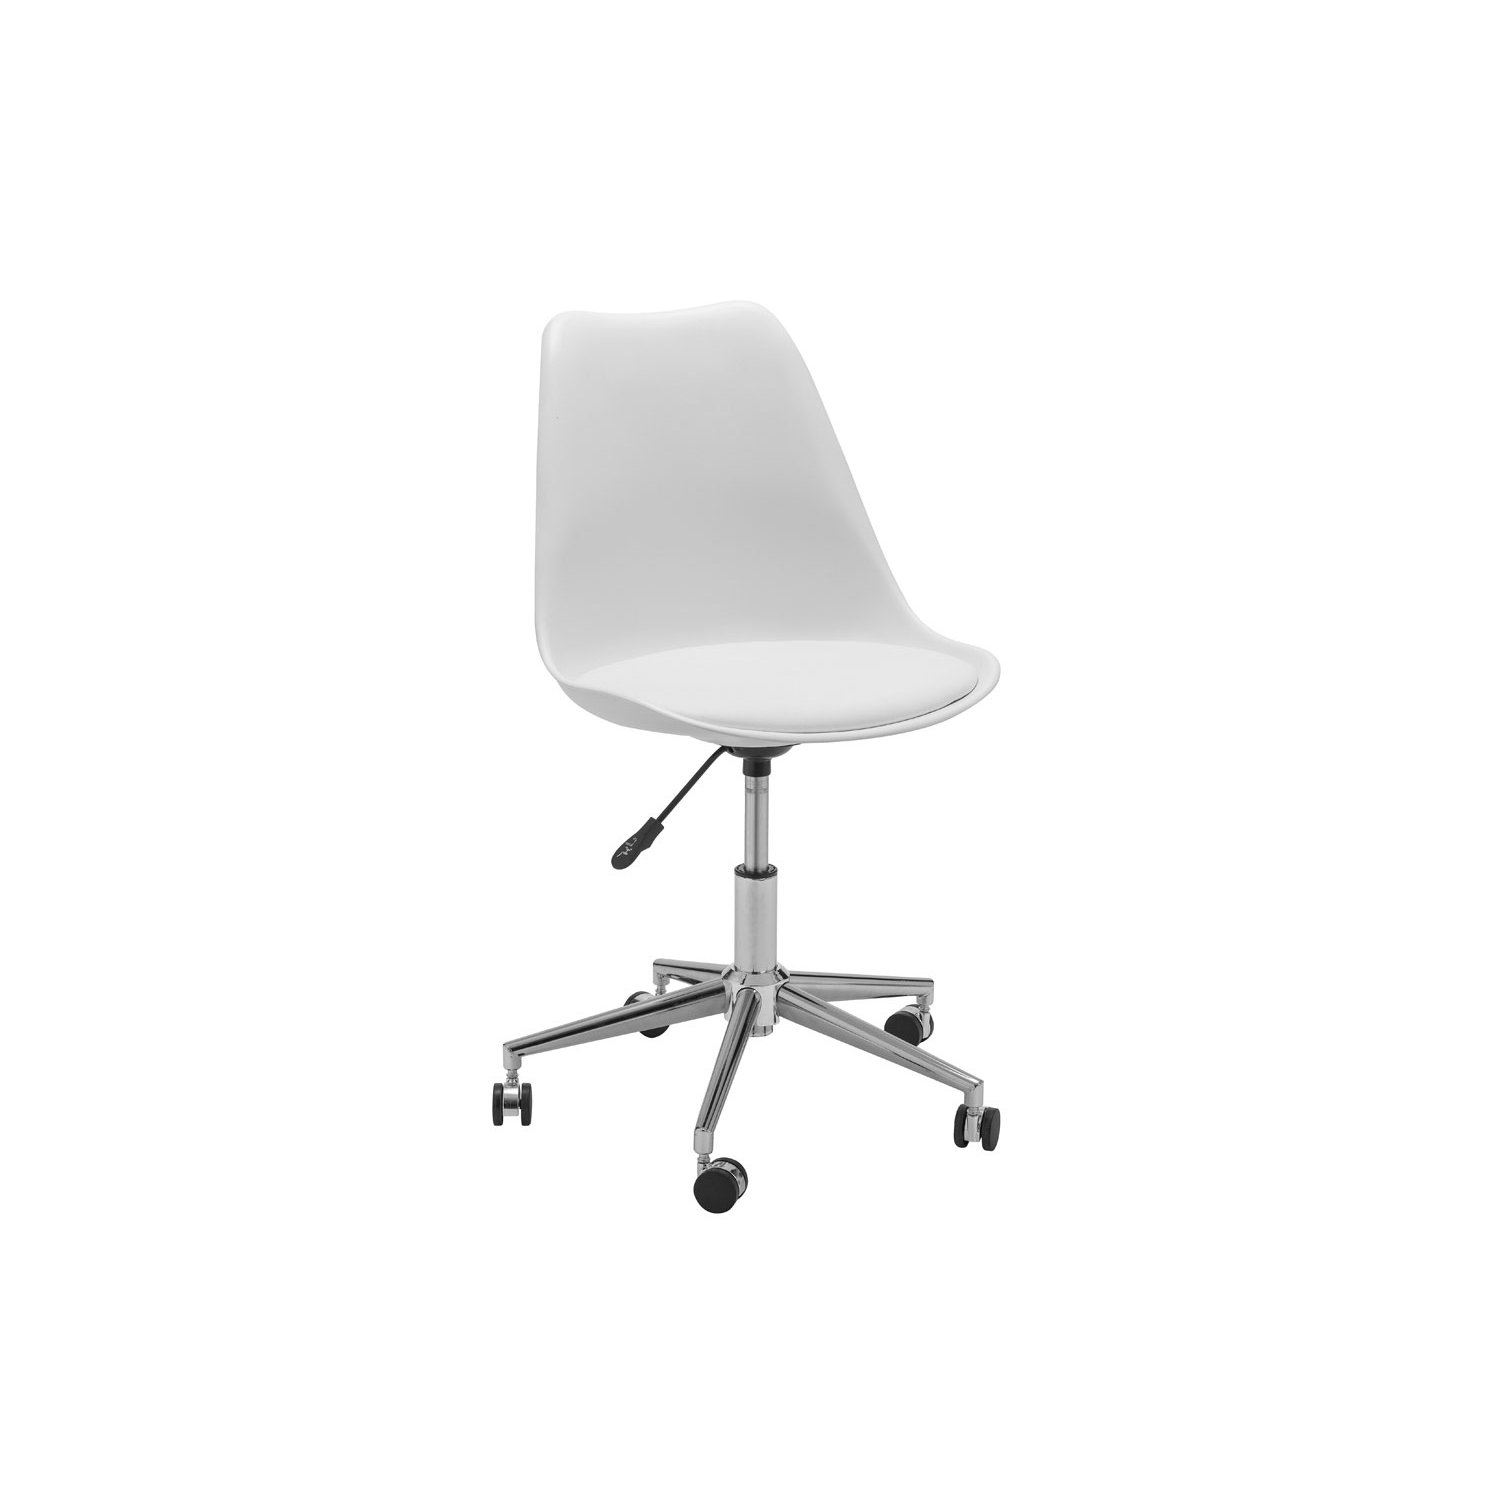 Denning White Office Chair with Chrome Base